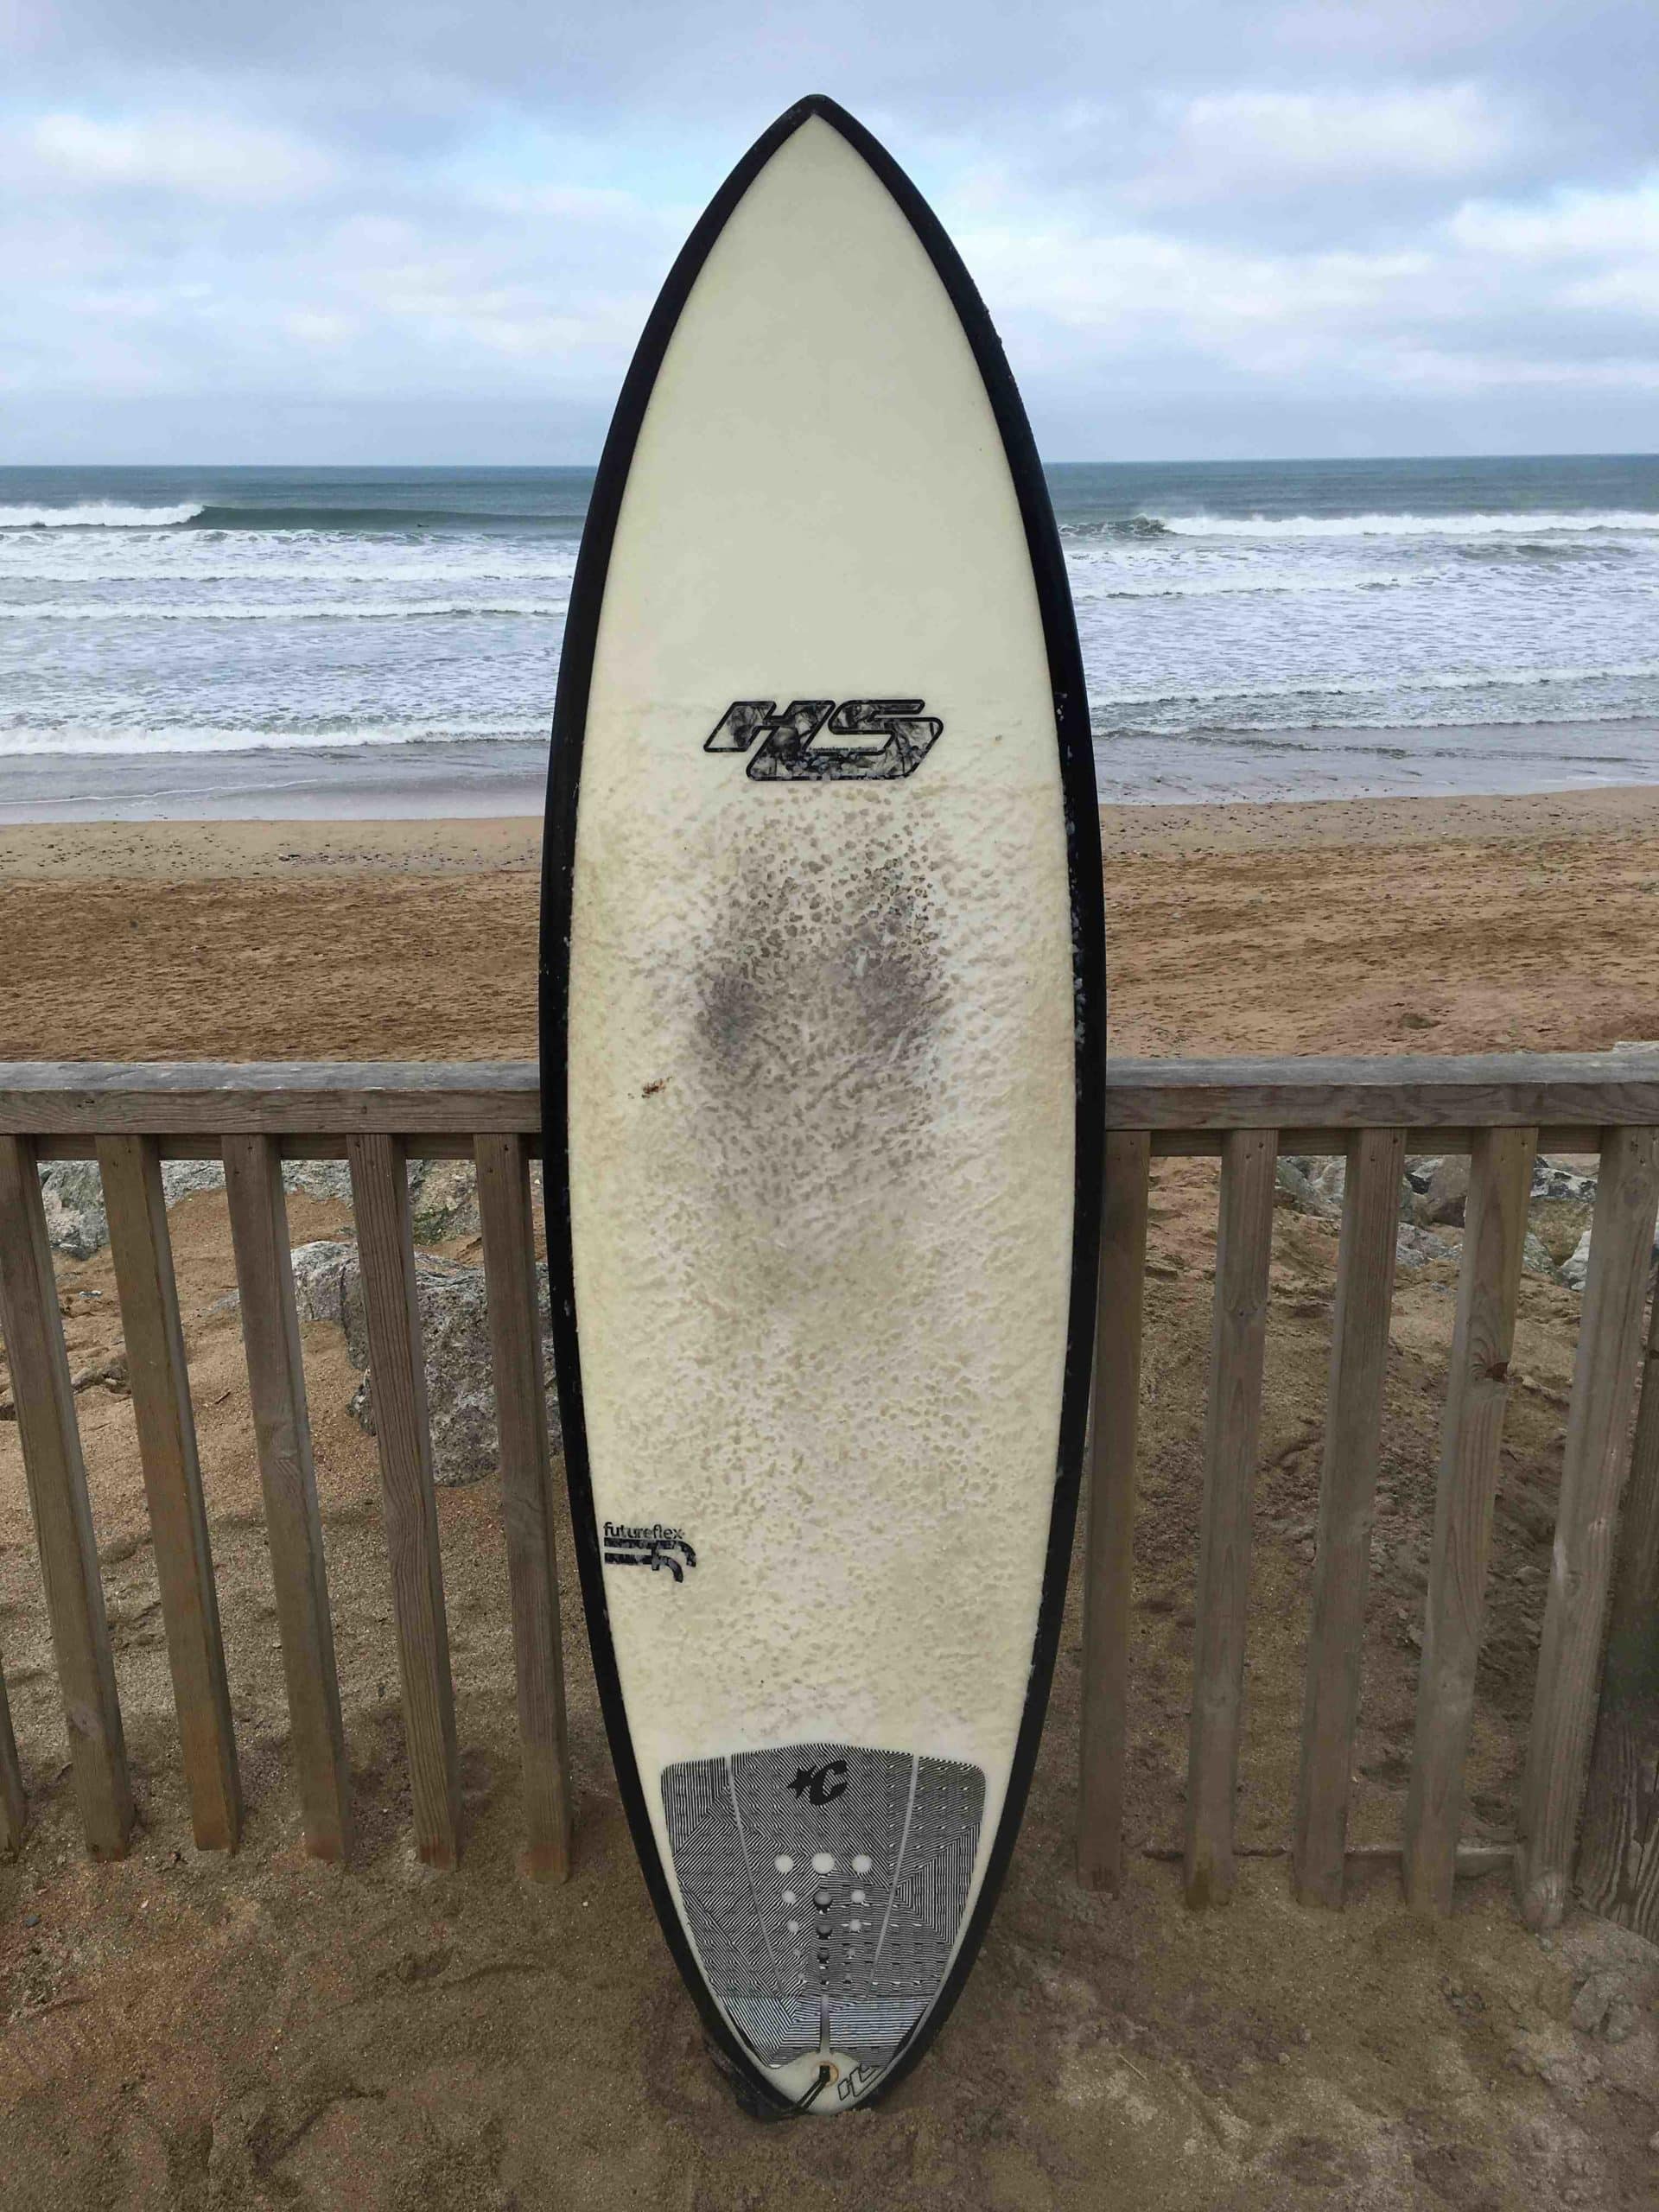 Where are Hayden surfboards made?